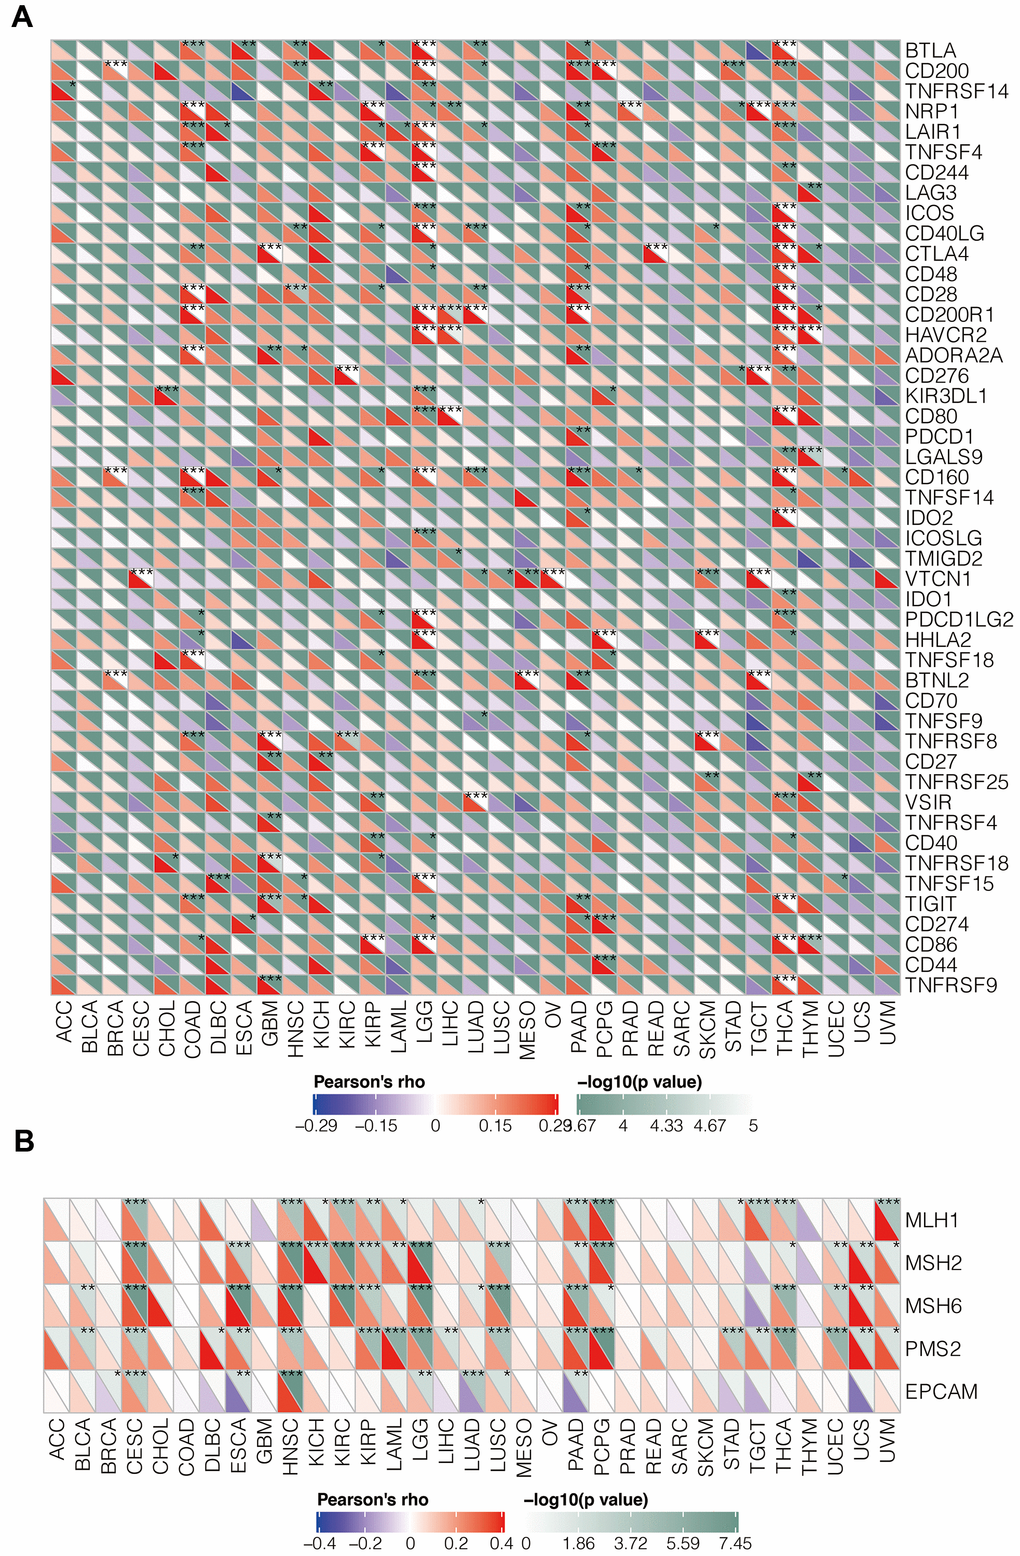 Relationship between IGSF10 expression and levels of immune checkpoint genes (ICGs) as well as mis-match repair genes (MMRs) in pan-cancer tissues. (A) The correlation analysis between IGSF 10 expression levels and immune checkpoint gene (ICG) expression in pan-cancer tissues. (B) Correlation analysis between IGSF 10 and five mismatch repair (MMR) genes, MLH1, MSH2, MSH6, PMS2, and EPCAM, in pan-cancer tissues. Note: * denotes p 